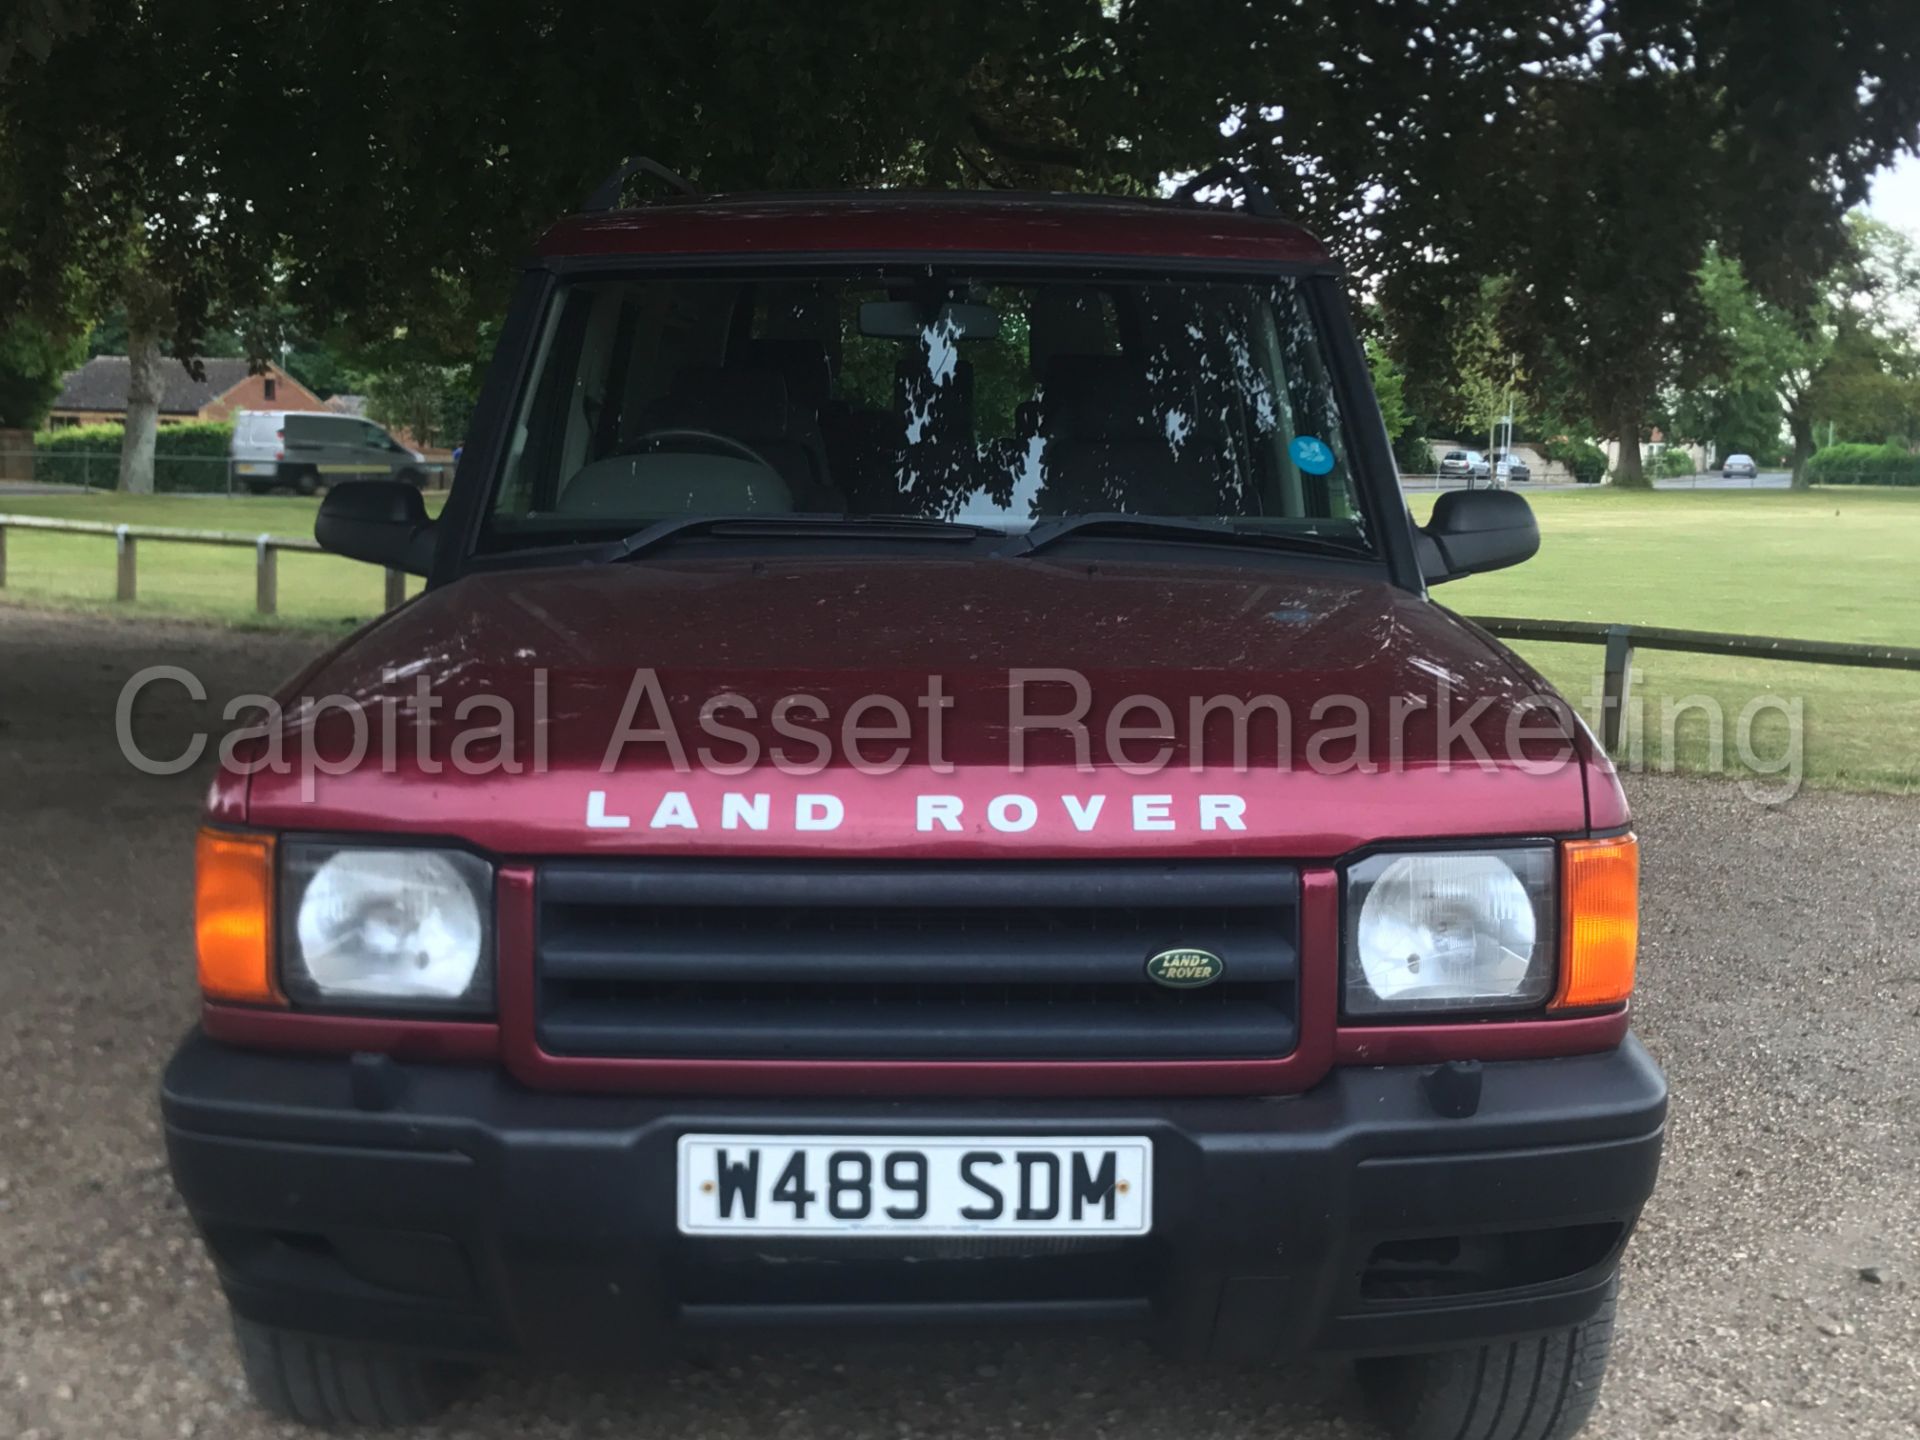 (On Sale) LAND ROVER DISCOVERY 'XS EDITION' (2000) 'TD5 - 7 SEATER - LEATHER' (NO VAT - SAVE 20%) - Image 3 of 27